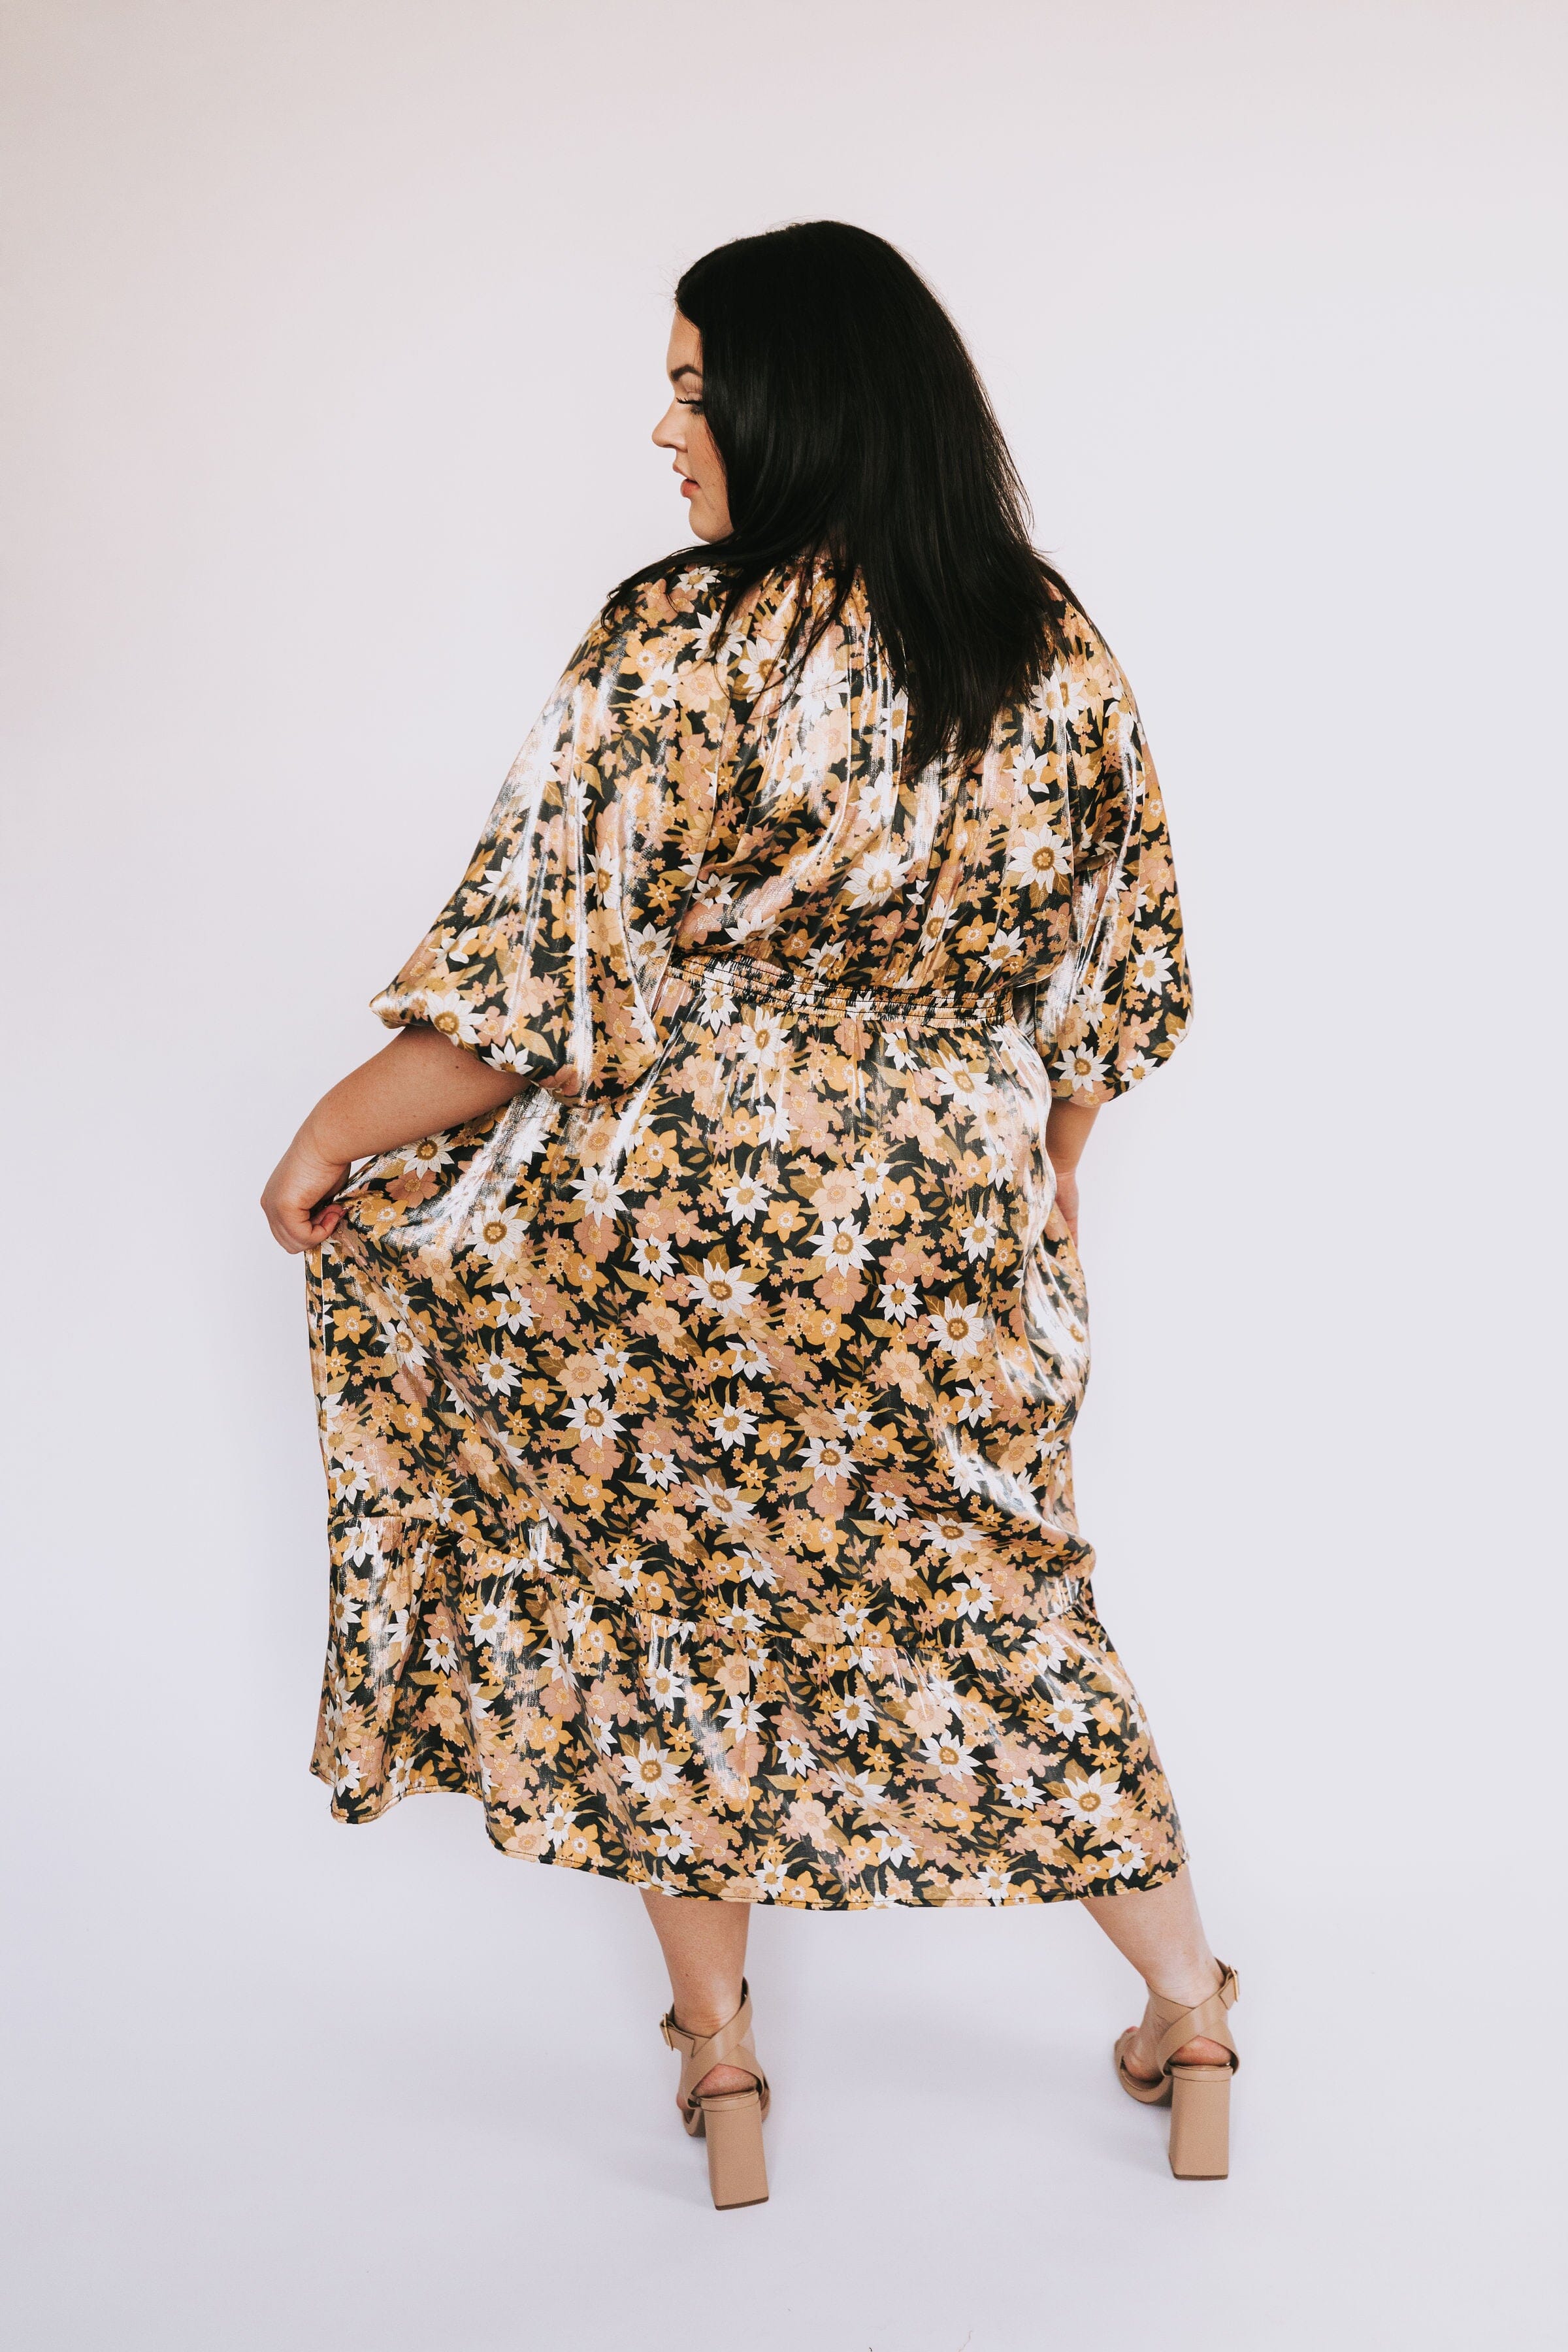 PLUS SIZE - Yours Truly Dress